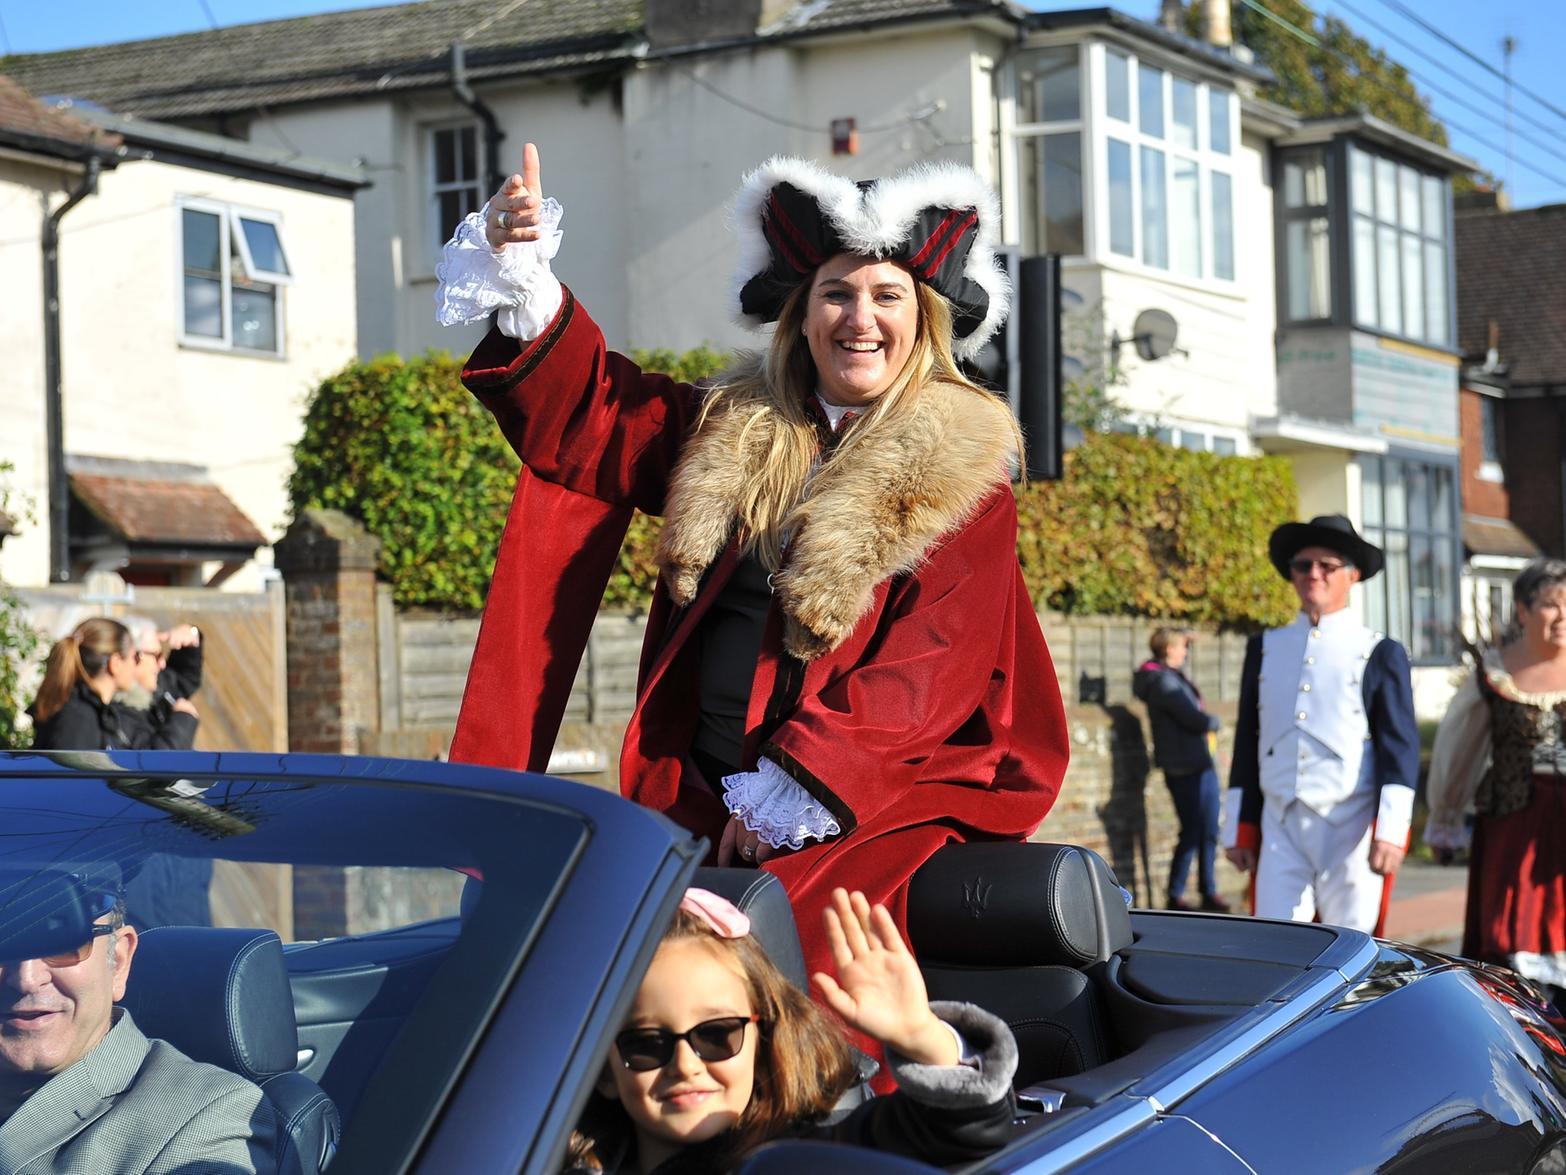 Independent State of Cuckfield Mayor Procession is set to take place on Saturday, October 17 - the Saturday morning after the election night.